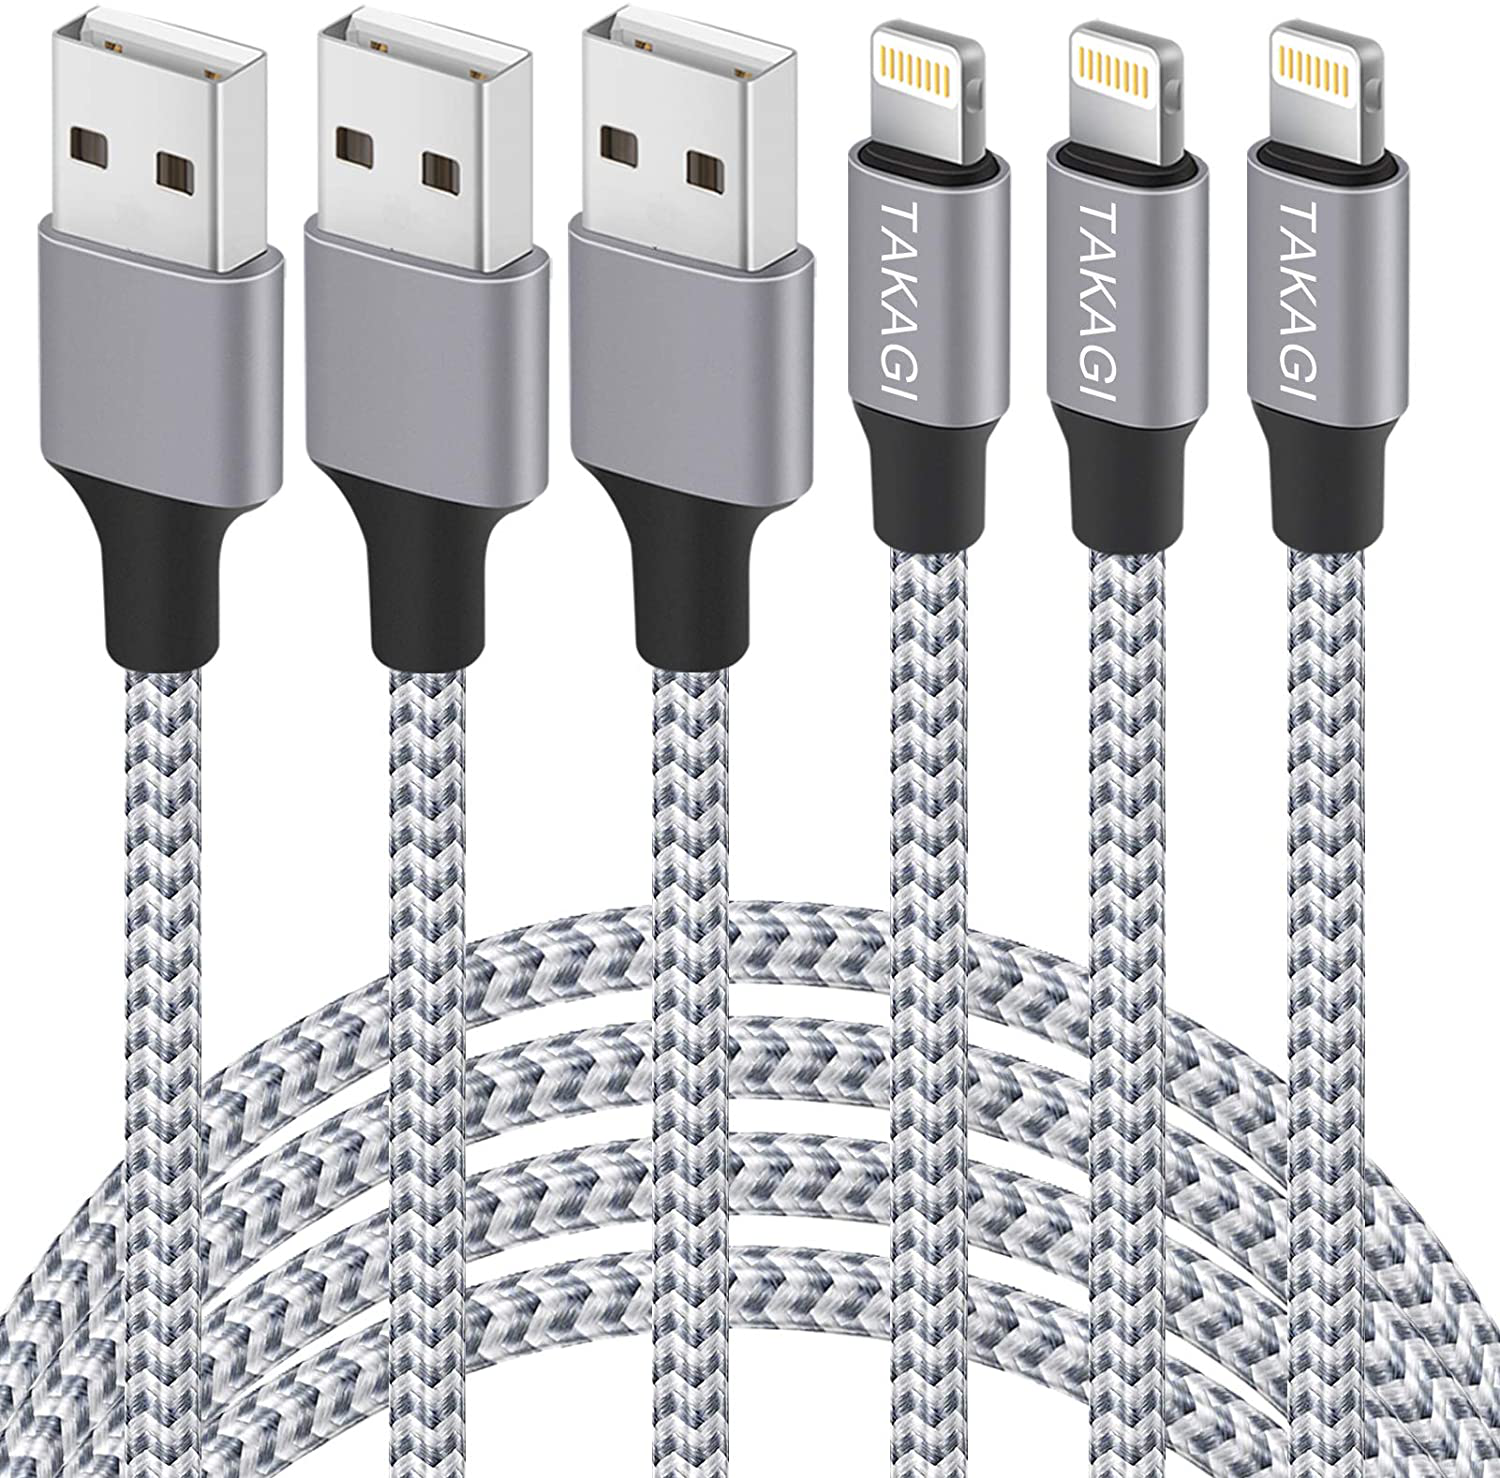 iPhone Charger, TAKAGI 3Pack 6FT Nylon Braided Lightning to USB Cable Power Fast Charging Data Sync Transfer Cord[Apple MFi Certified]Compatible with iPhone 12 11 Pro Max XS XR X 8 7 Plus 6S SE iPad